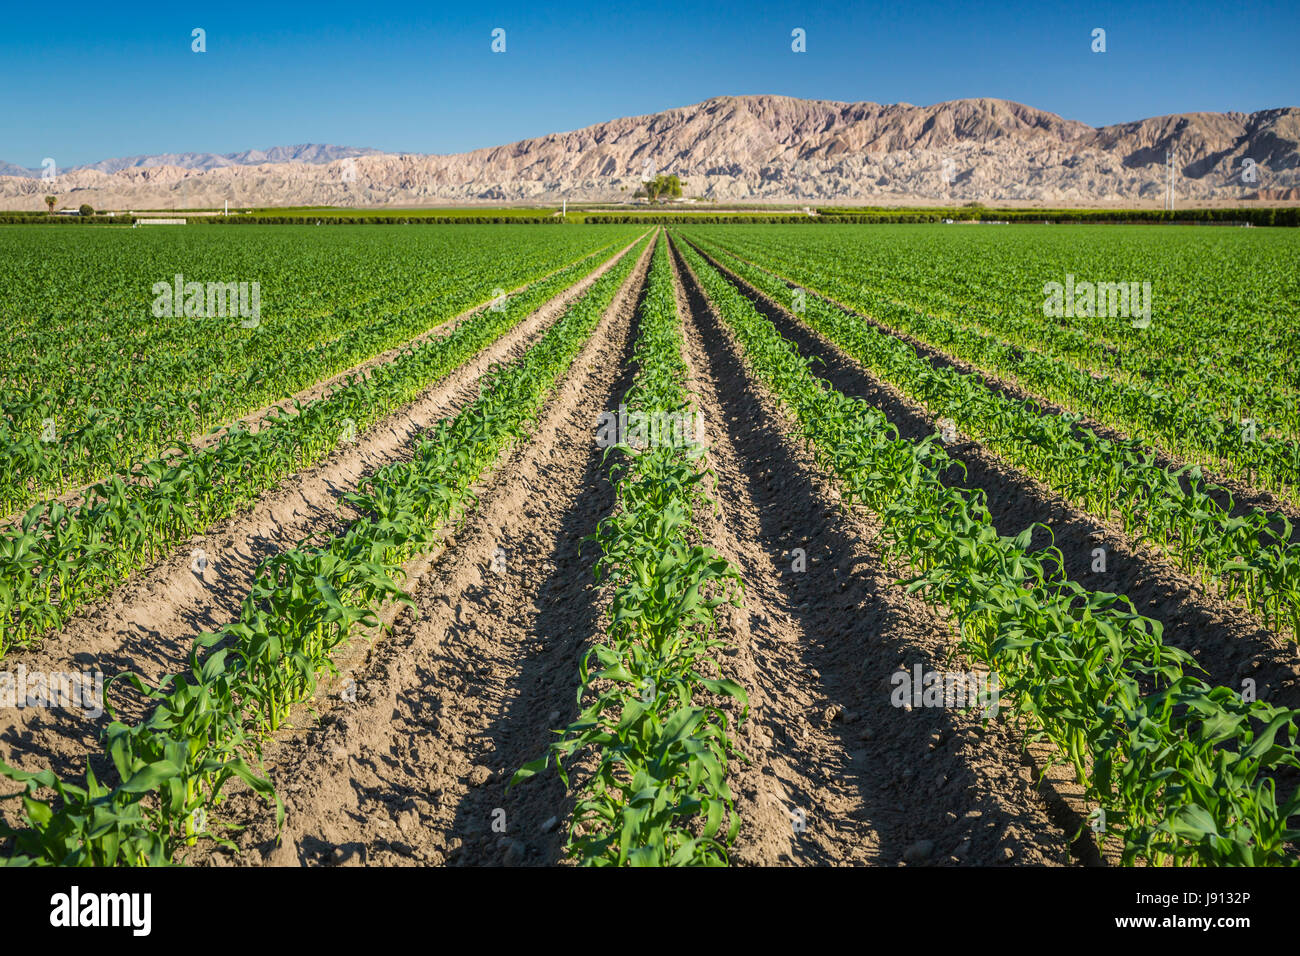 A row crop of young corn in a field  in the Imperial Valley of California, USA. Stock Photo